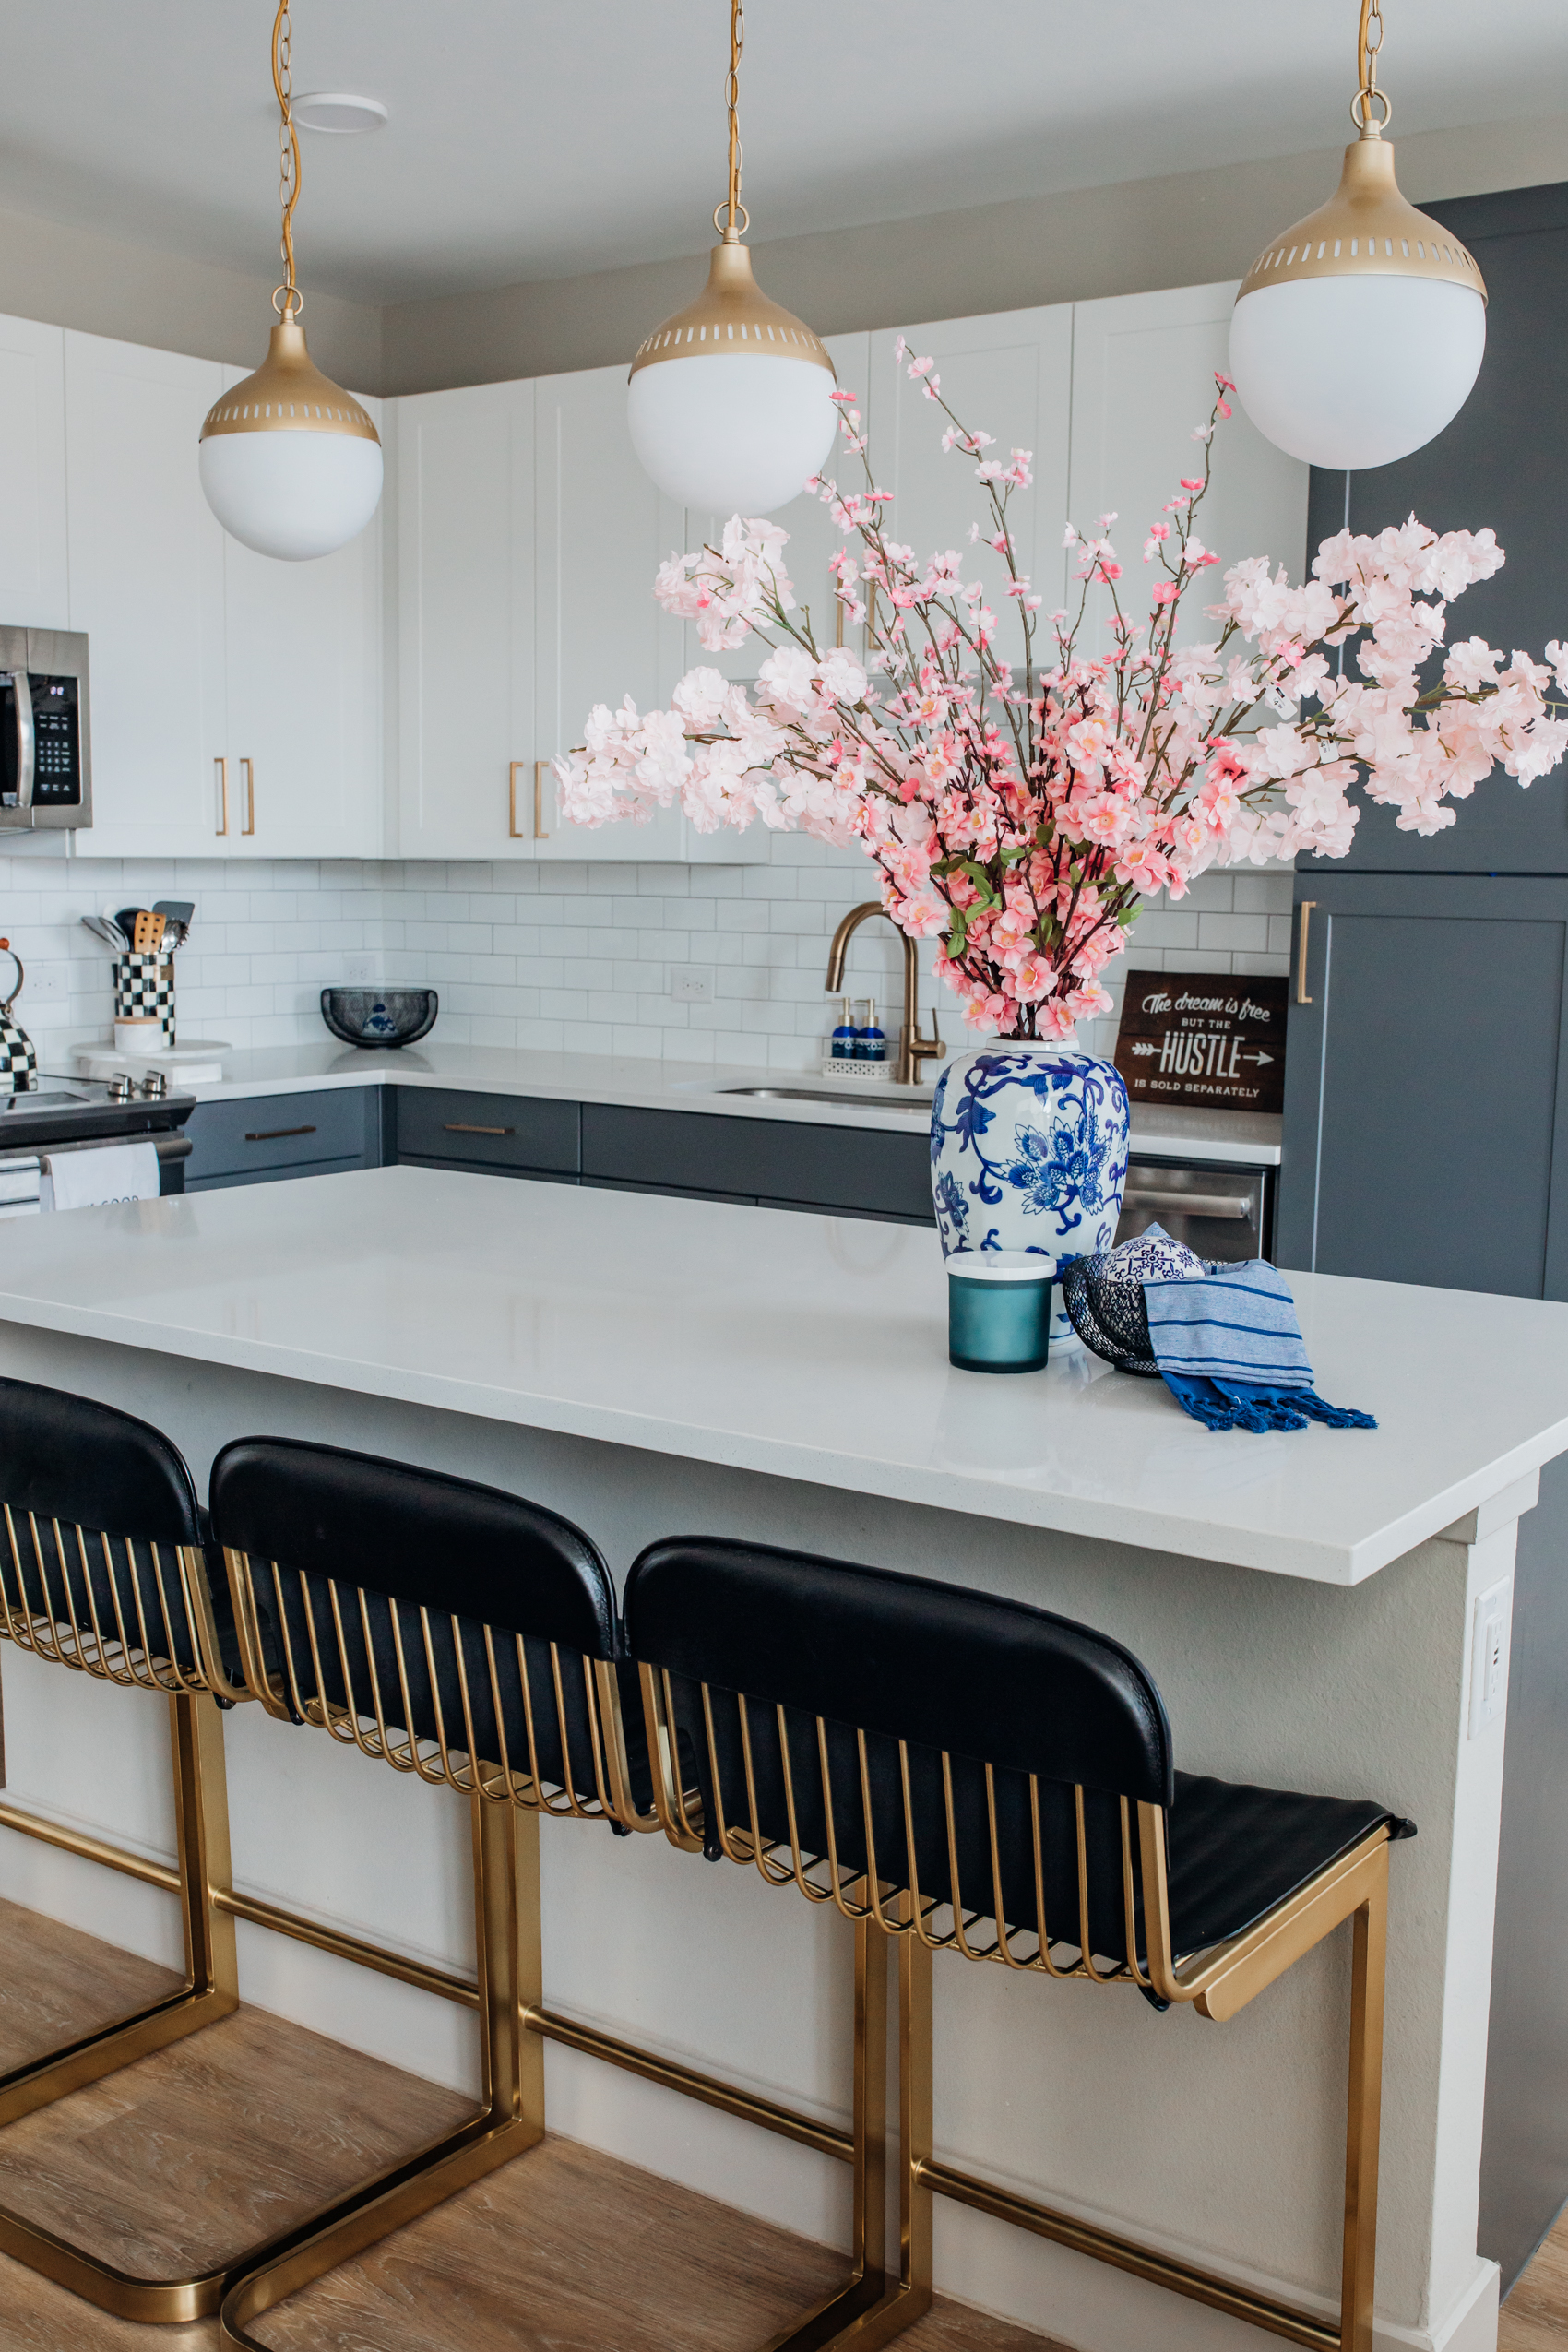 Spring home decor in a white and blue two-toned kitchen with CB2 Rake black leather barstools, gold pendants, subway tile and cherry blossom arrangements and black mesh bowls